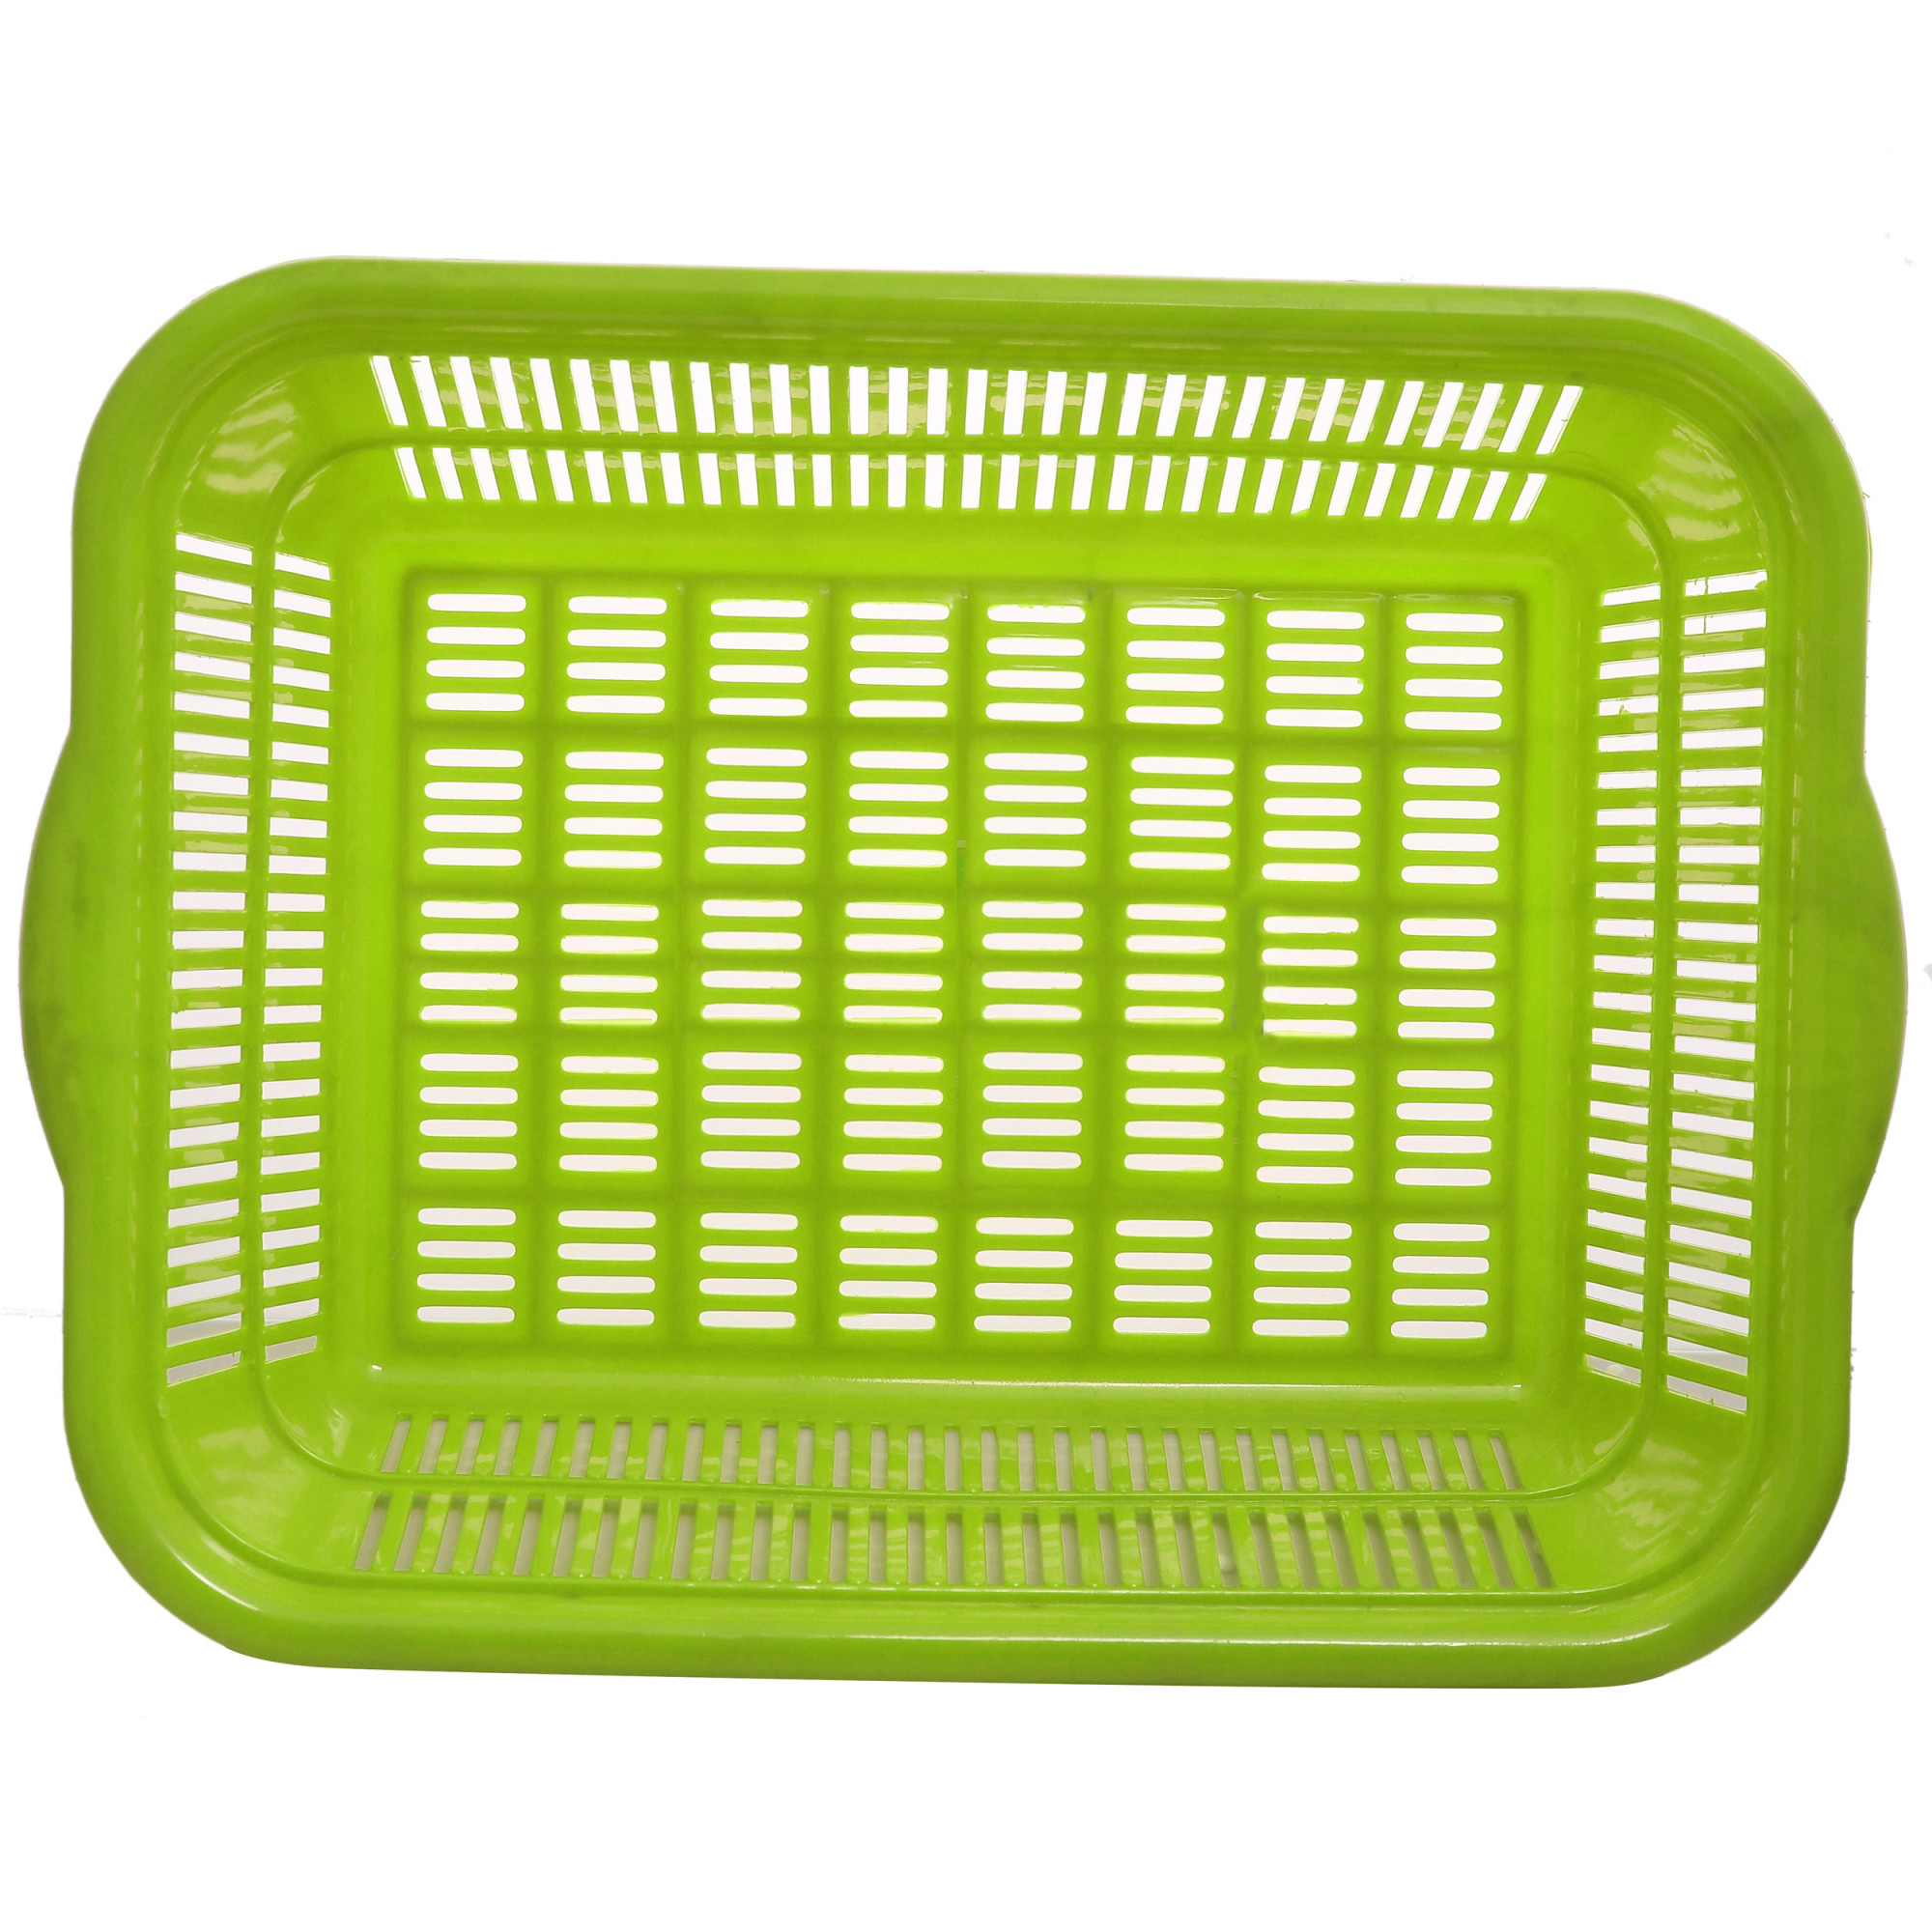 Kuber Industries 3 Pieces Plastic Kitchen Dish Rack Drainer Vegetables And Fruits Basket Dish Rack Multipurpose Organizers ,Small Size,Green & Blue & Yellow